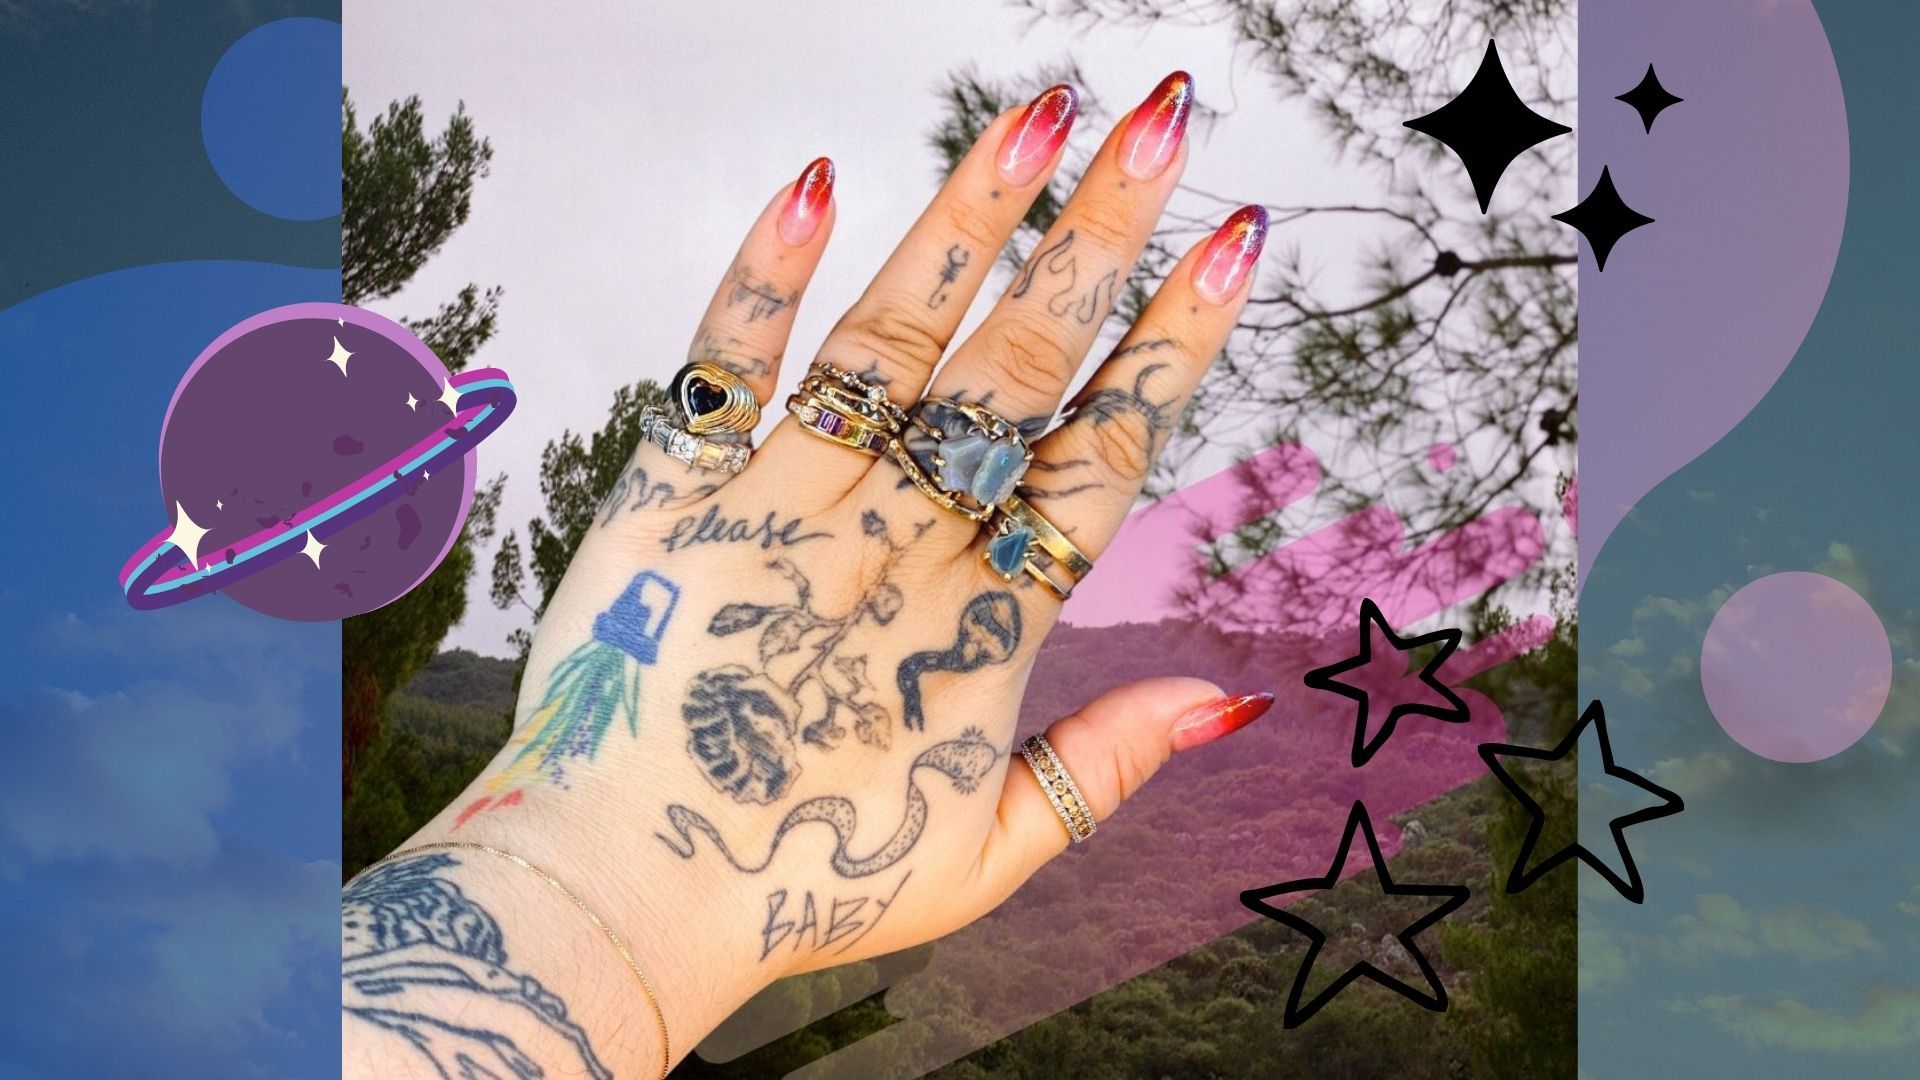 A Hand Tattoo Guide for Ladies 10 Designs from Wholistic to Realistic